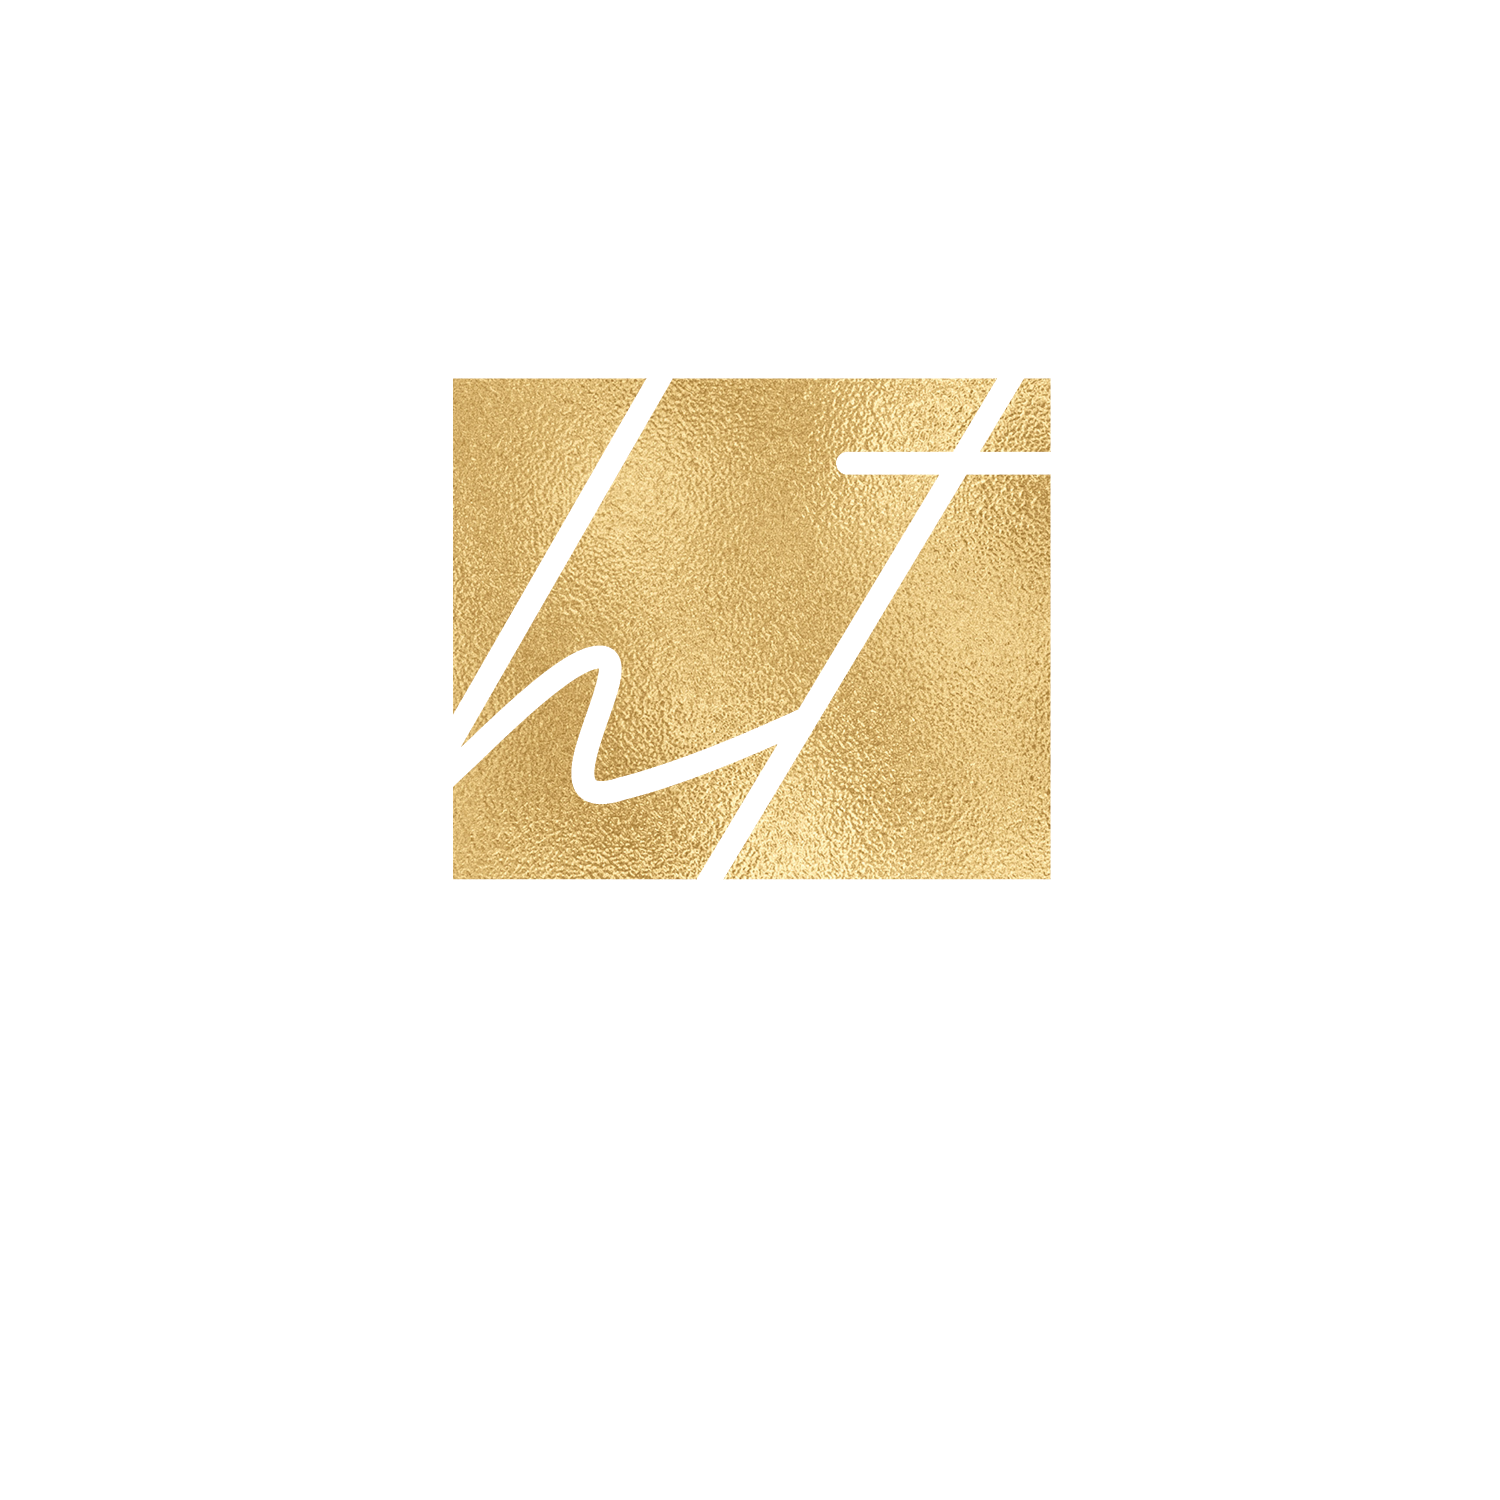 Harnal Travel - Go Beyond the Ordinary